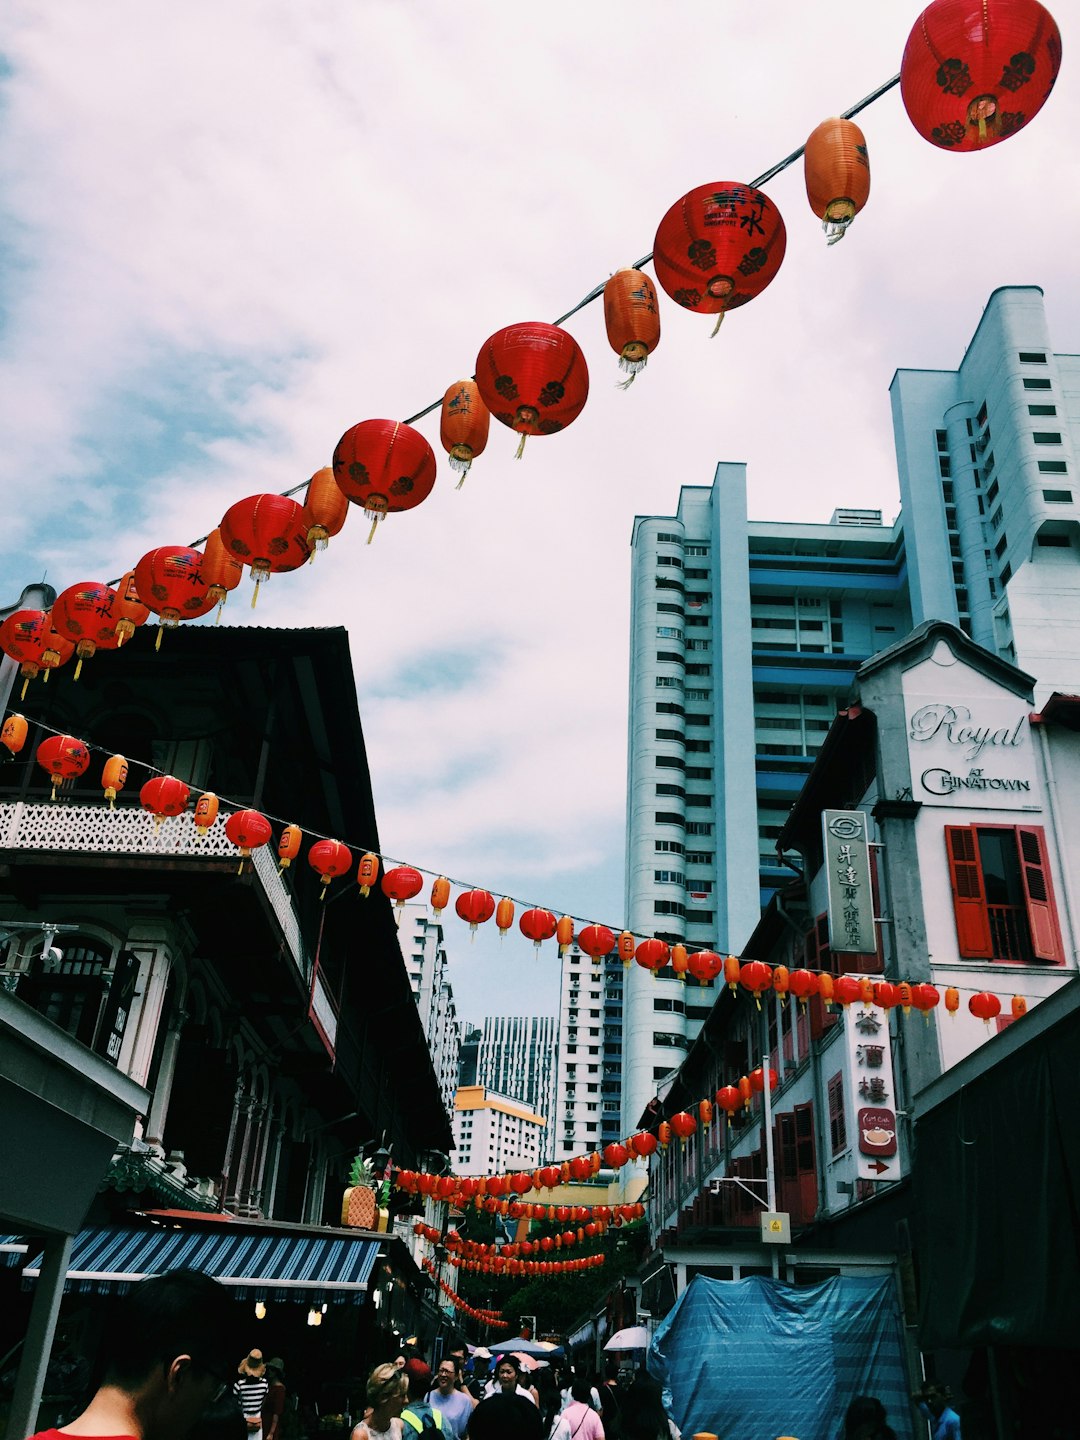 red and orange lanterns hanged above alleyway surrounded with group of people